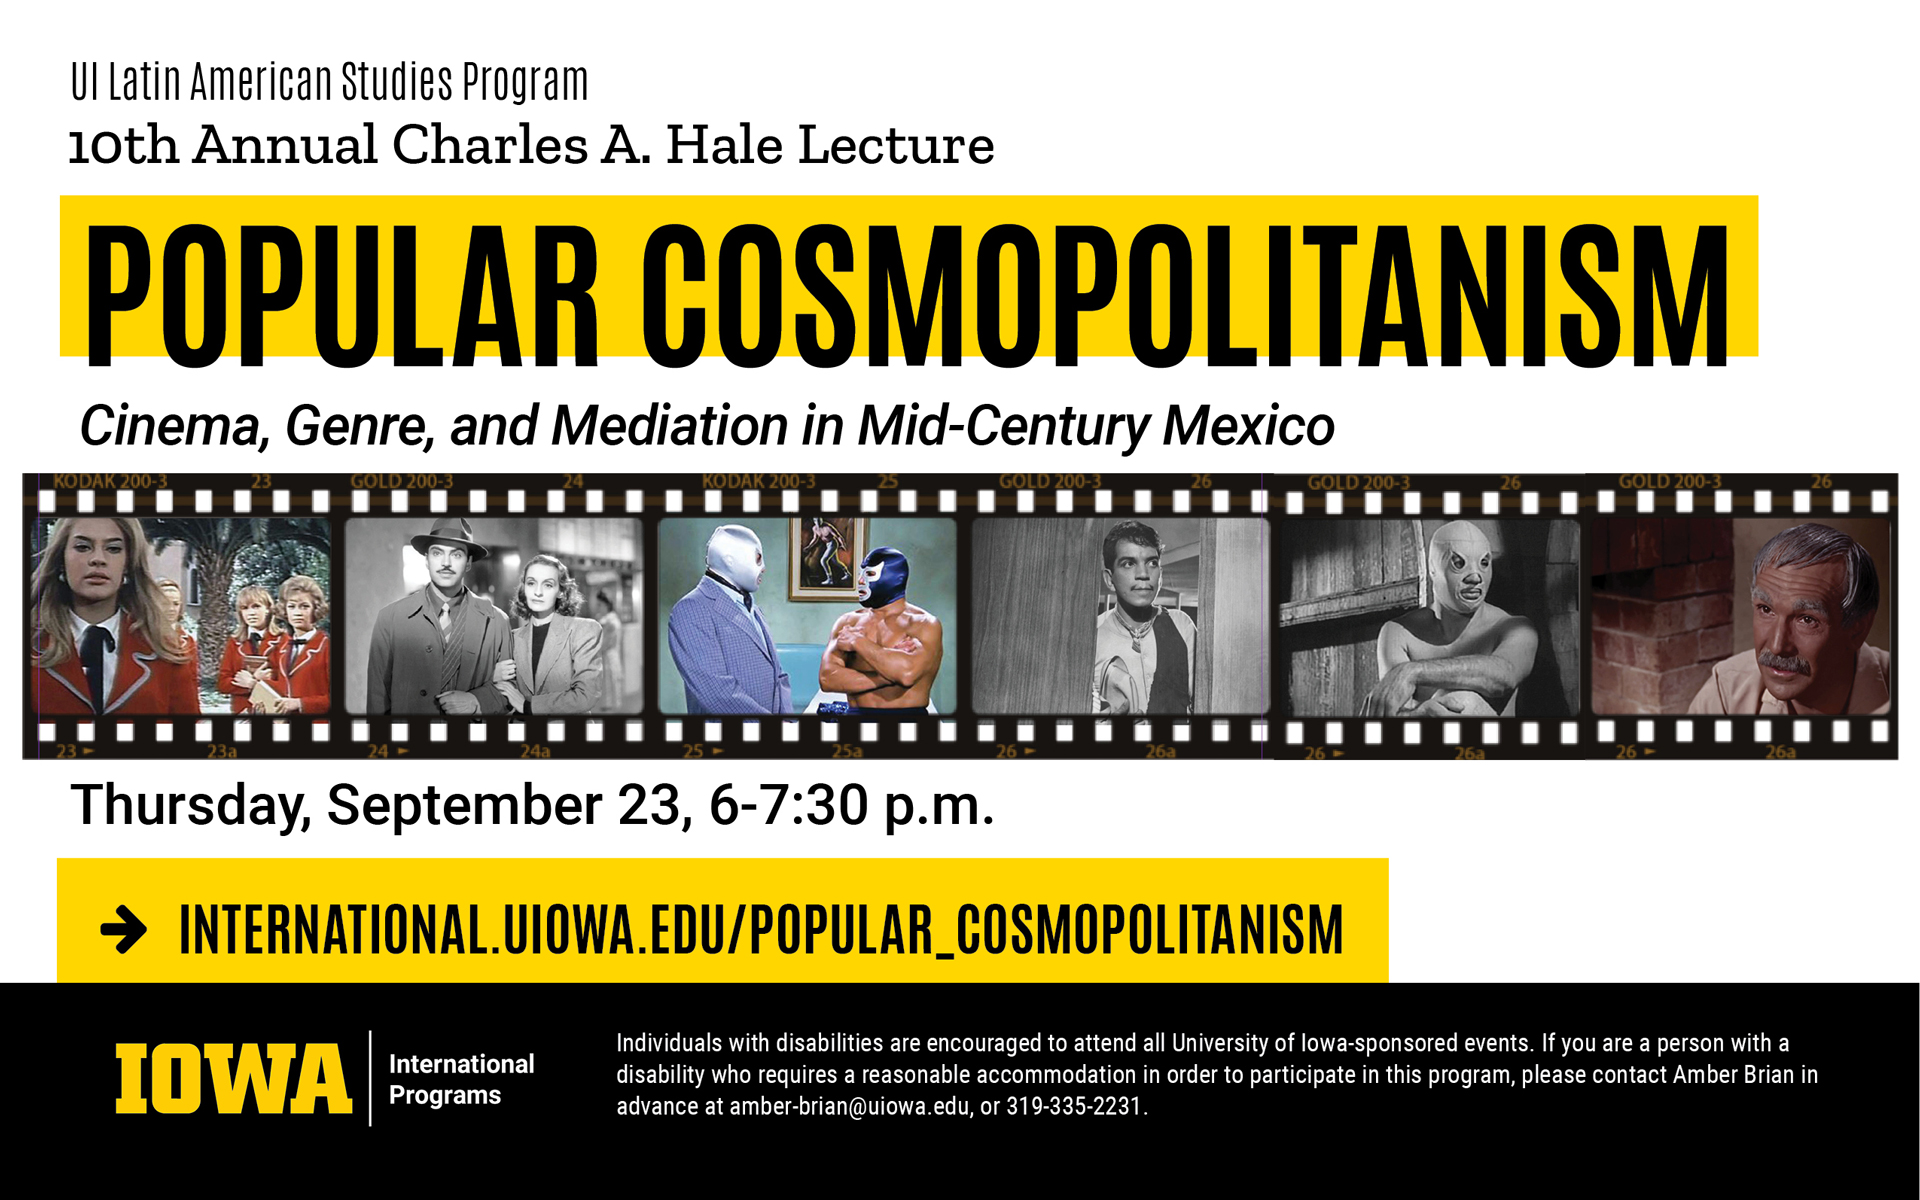 UI Latin American Studies Program 10th Annual Charles A Hale Lecture Popular Cosmopolitanism cinema, genre, and mediation in mid-century Mexico Thursday September 23 from six to seventy thirty pm visit international.uiowa.edu/popular_cosmopolitanism for more